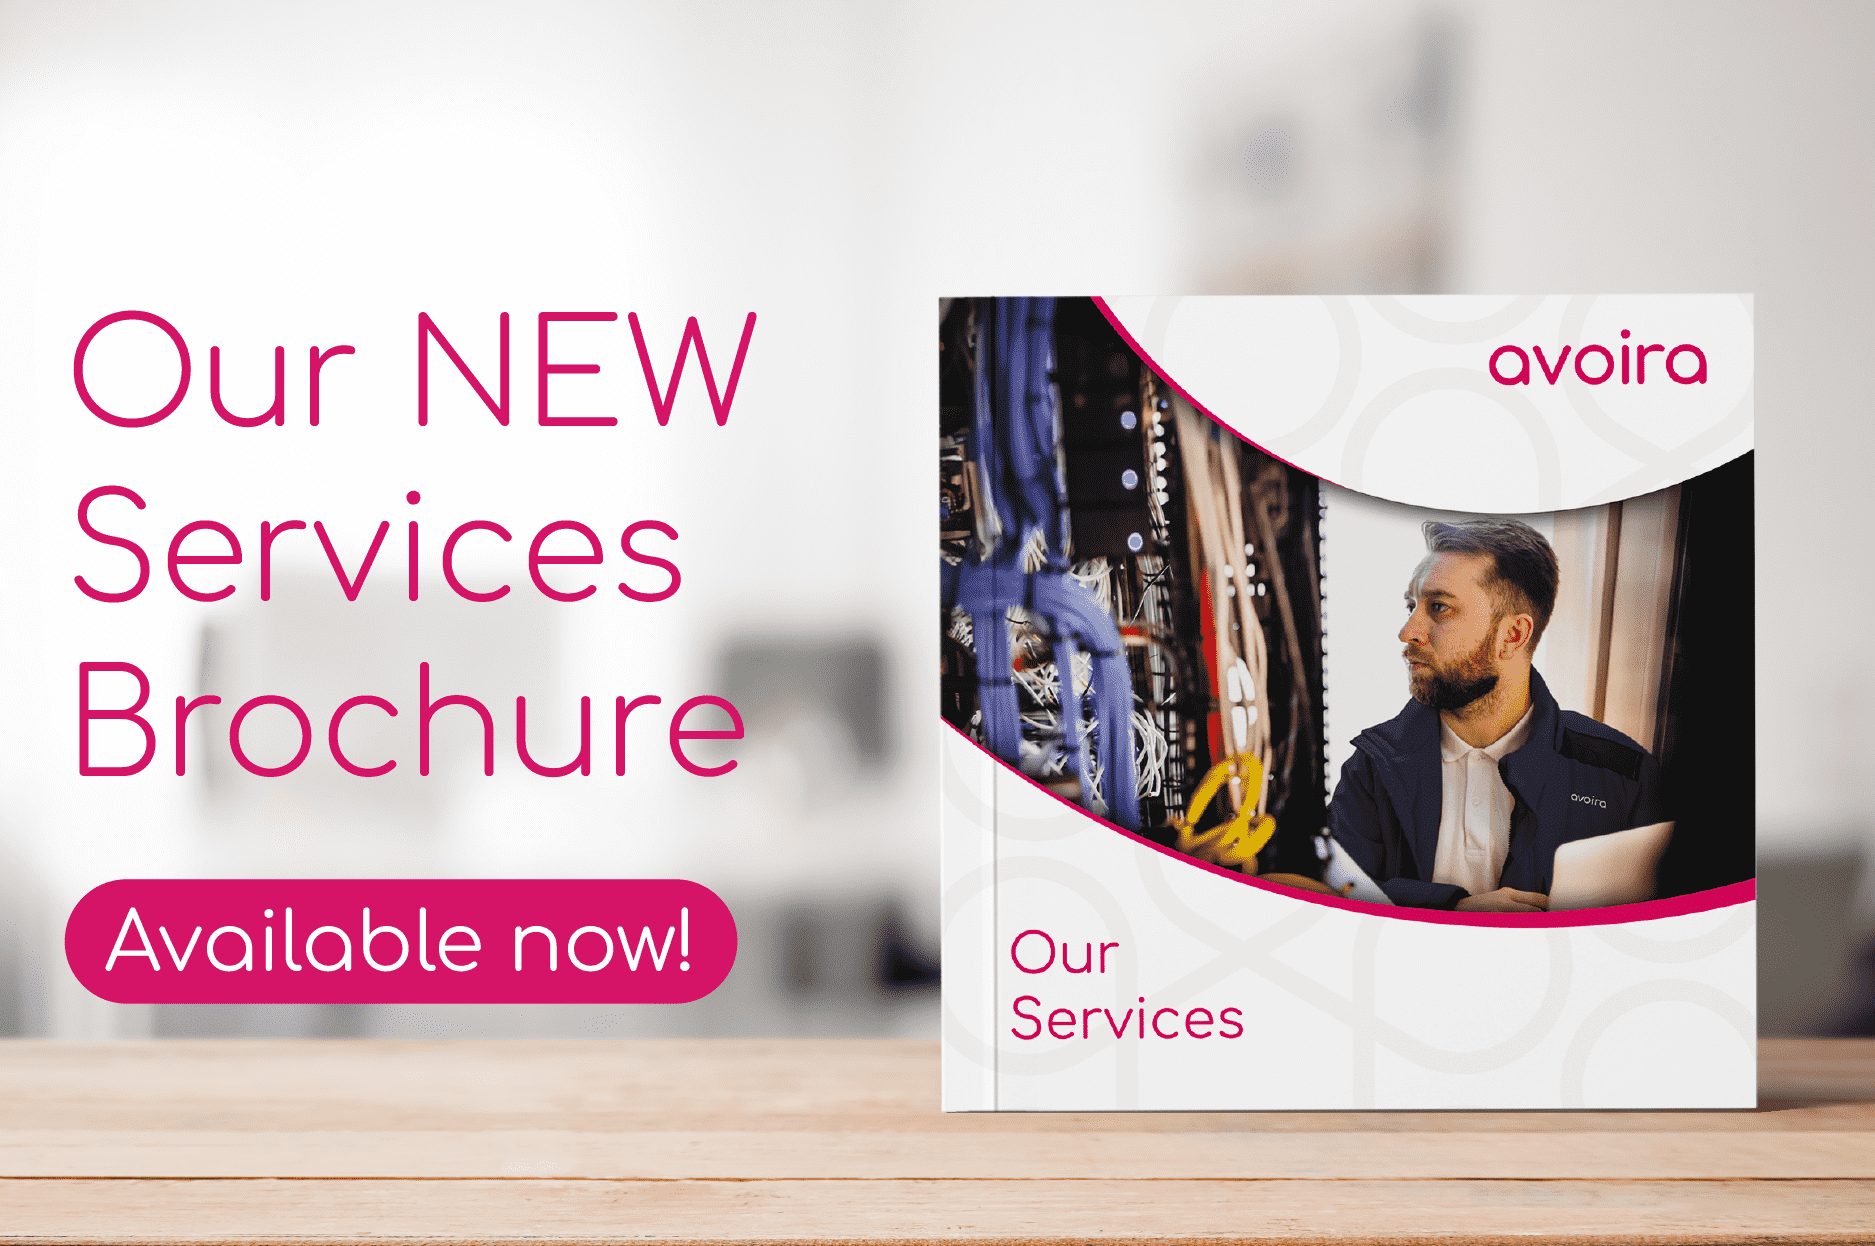 Our New Services Brochure